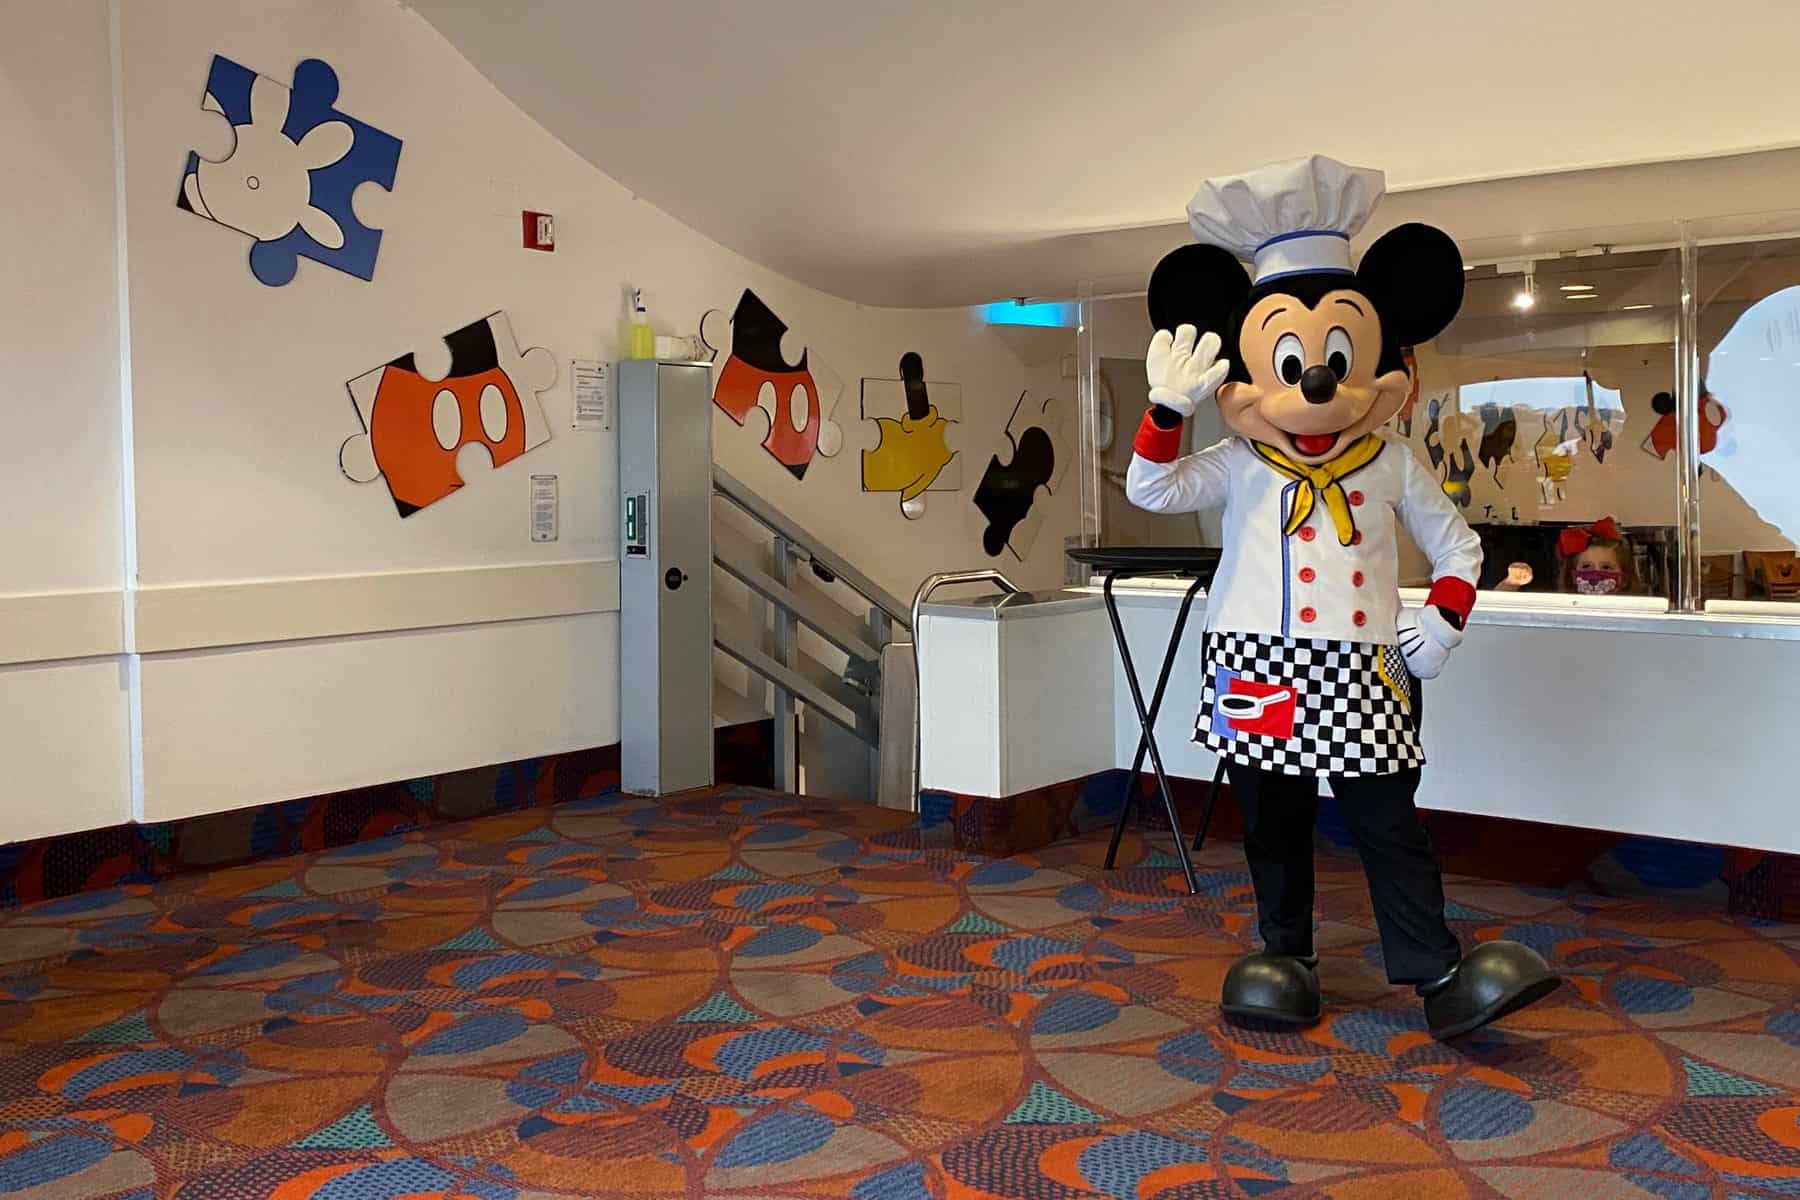 More Dining Opening At Disney World, Including New Chef Mickey’s Dinner